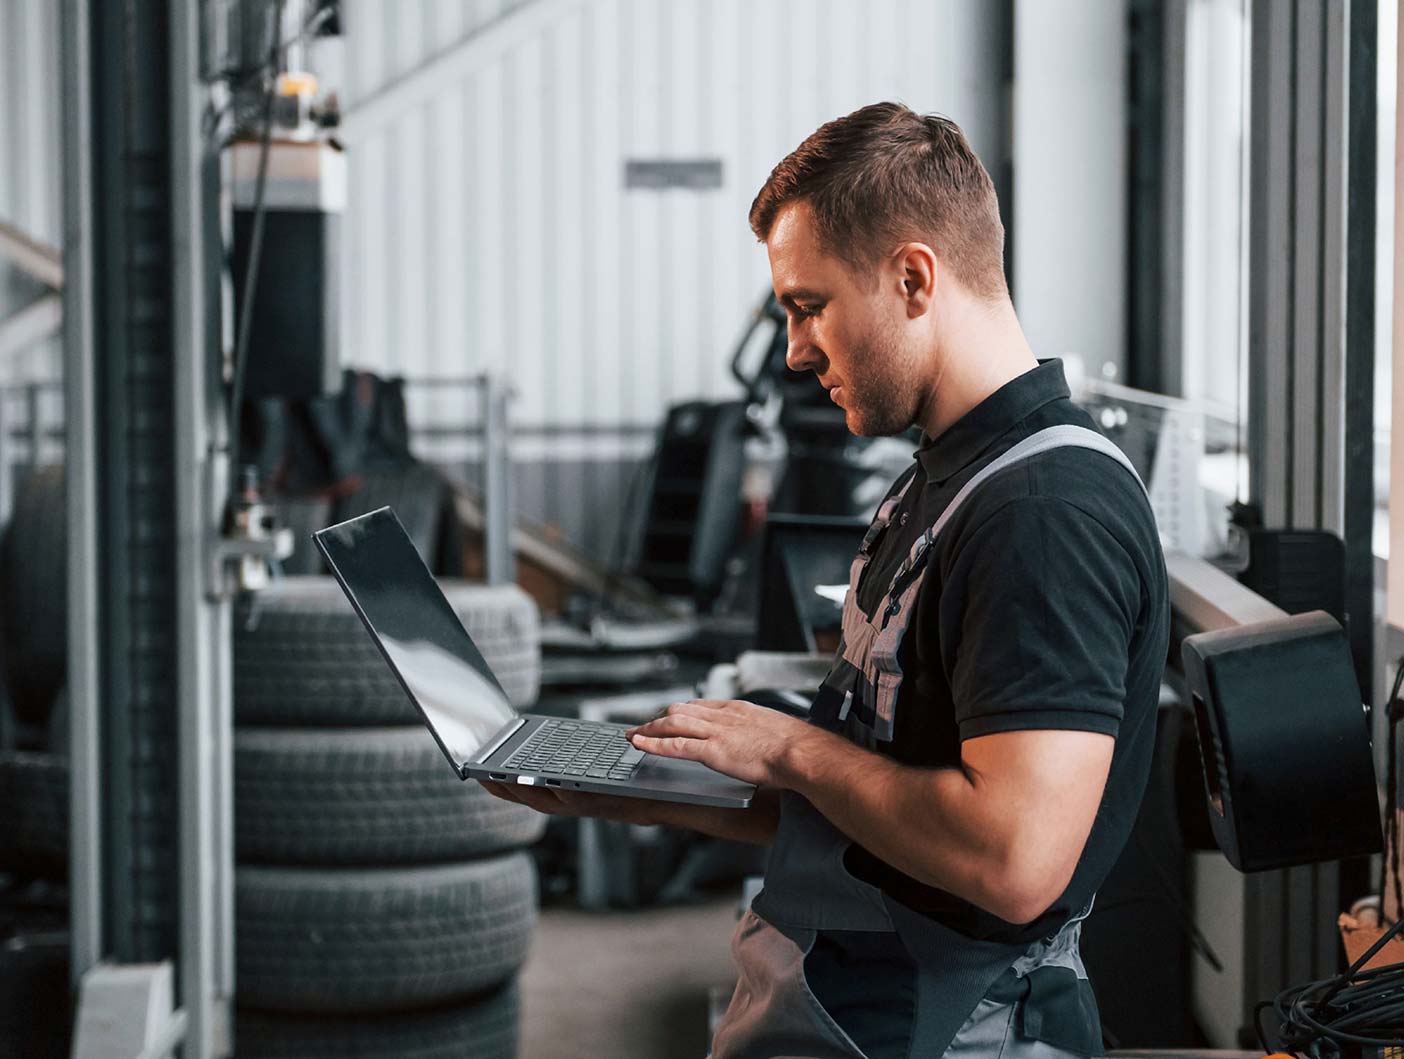 Young man in overalls uses laptop in a garage.